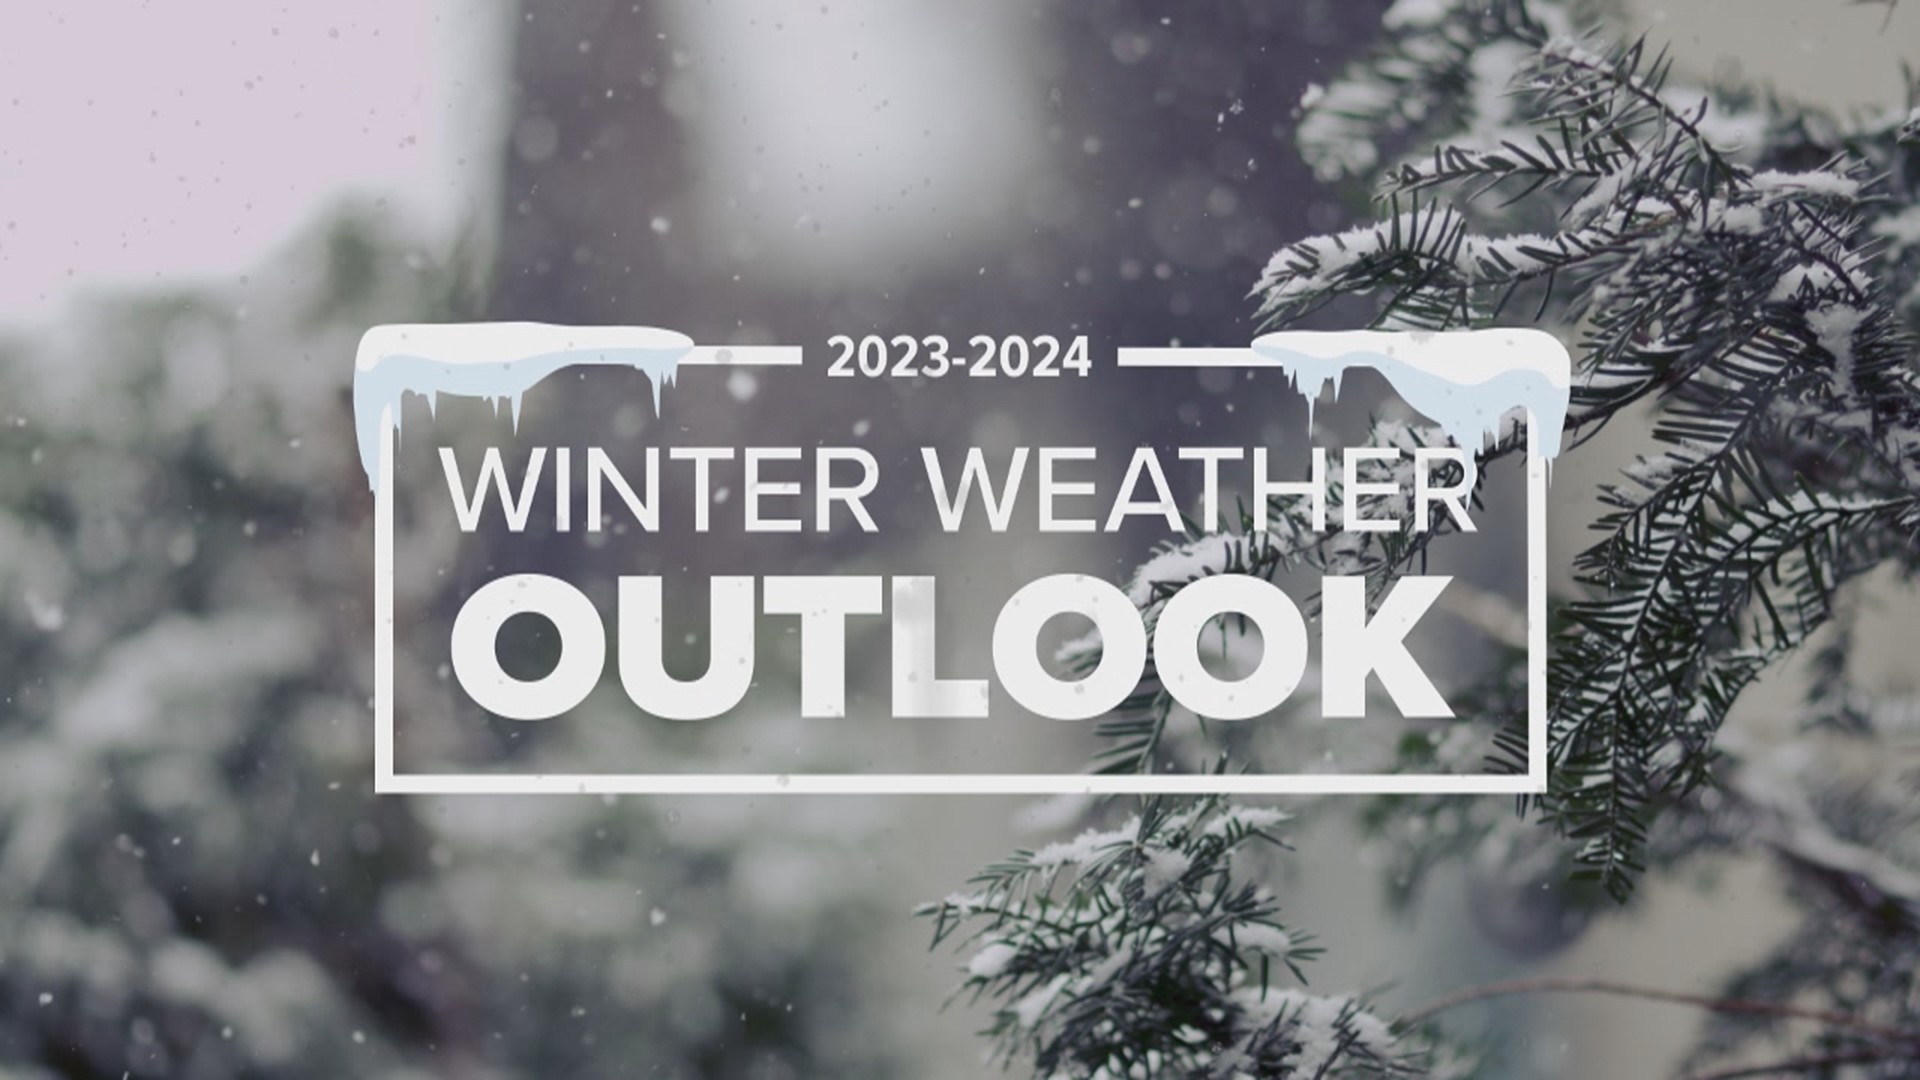 A longer in depth talk about the 2023-2024 Winter Weather outlook